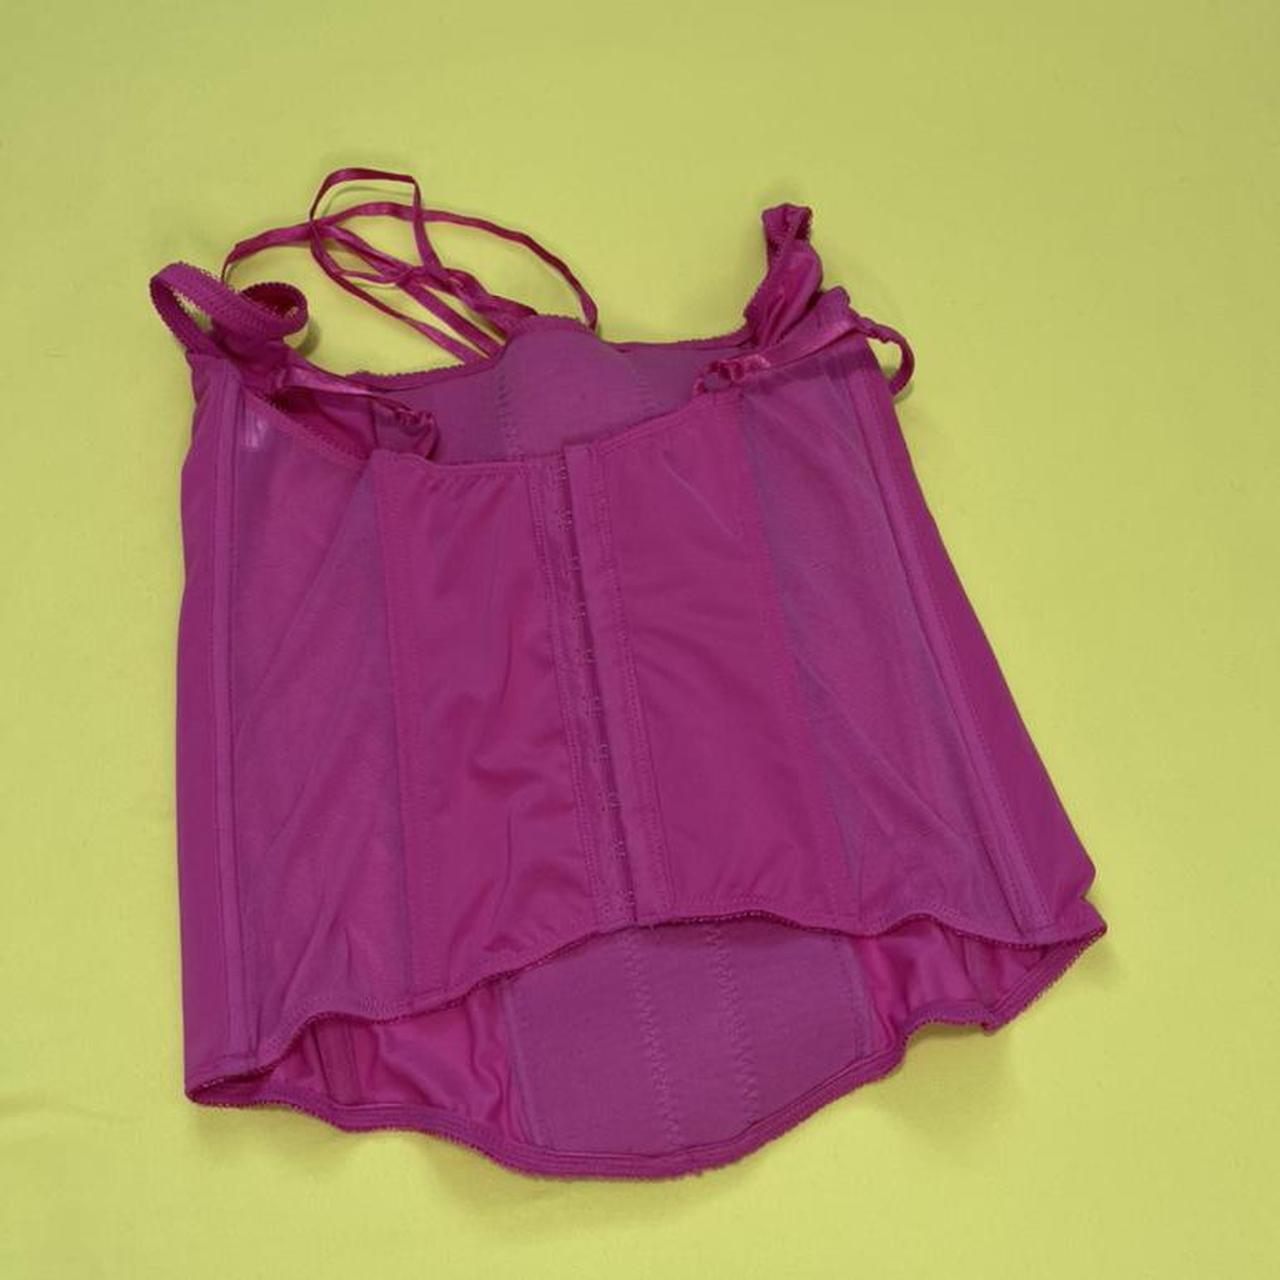 Product Image 3 - Princess Pink Bustier 

#bustier #pink